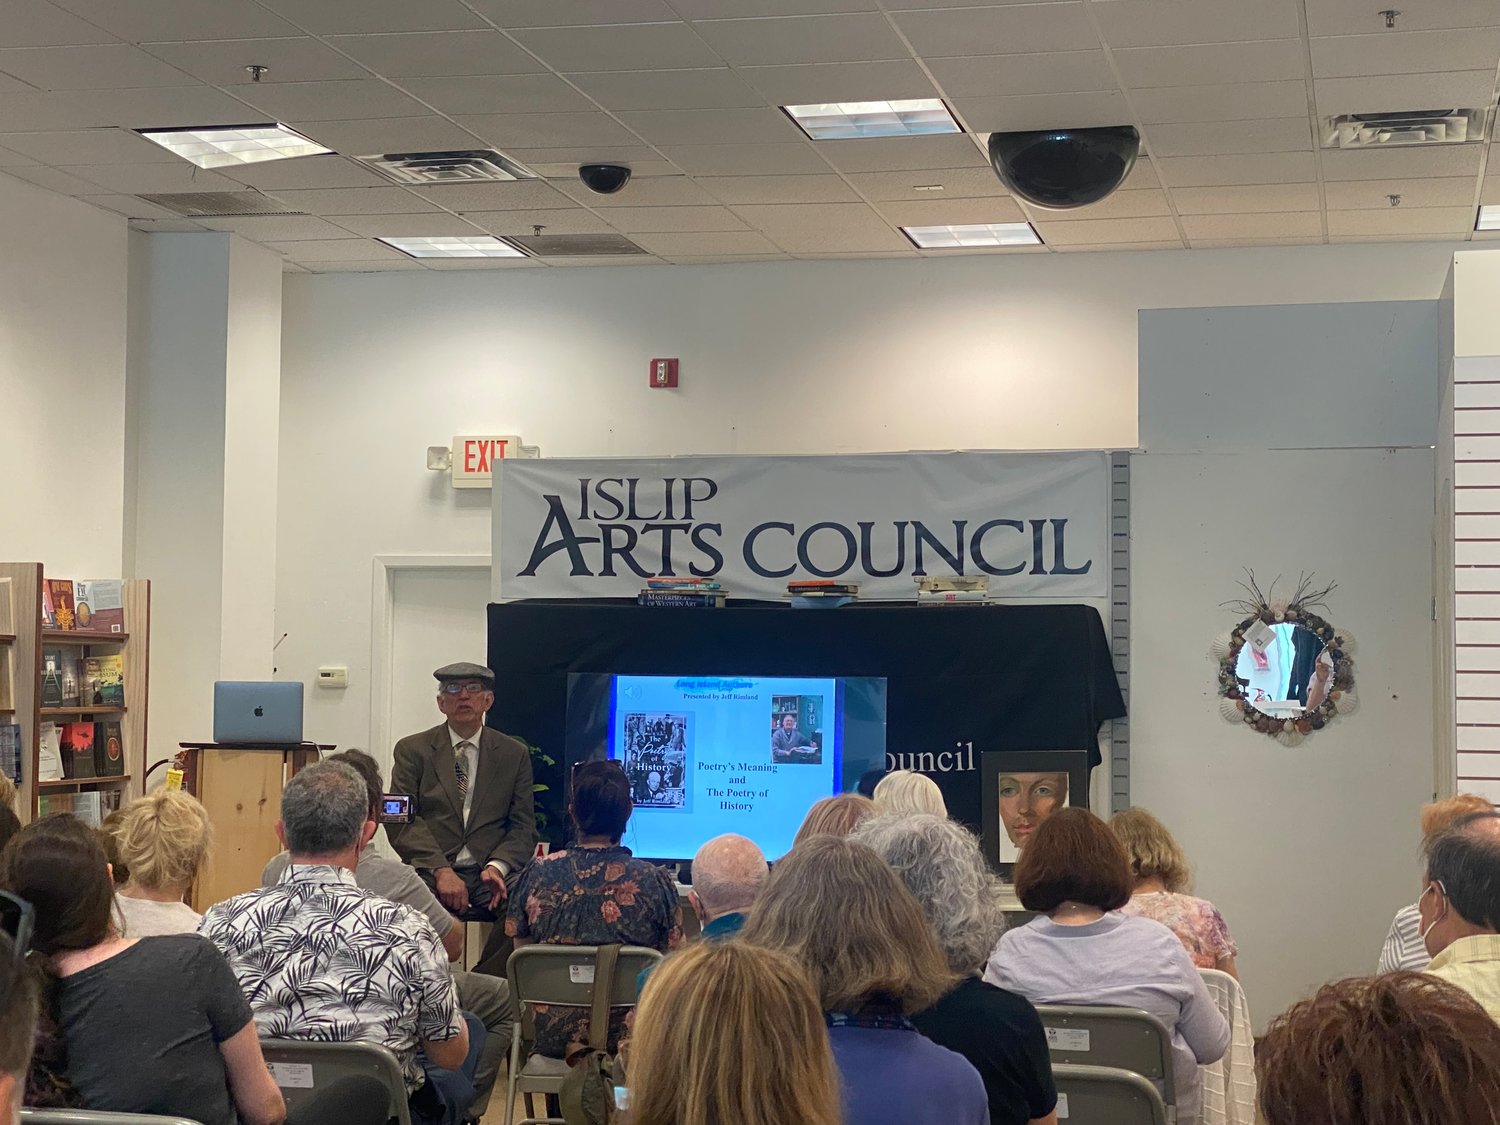 Author Jeff Rimland presented and read excerpts from his new book of poetry at the Islip Arts Council gallery.